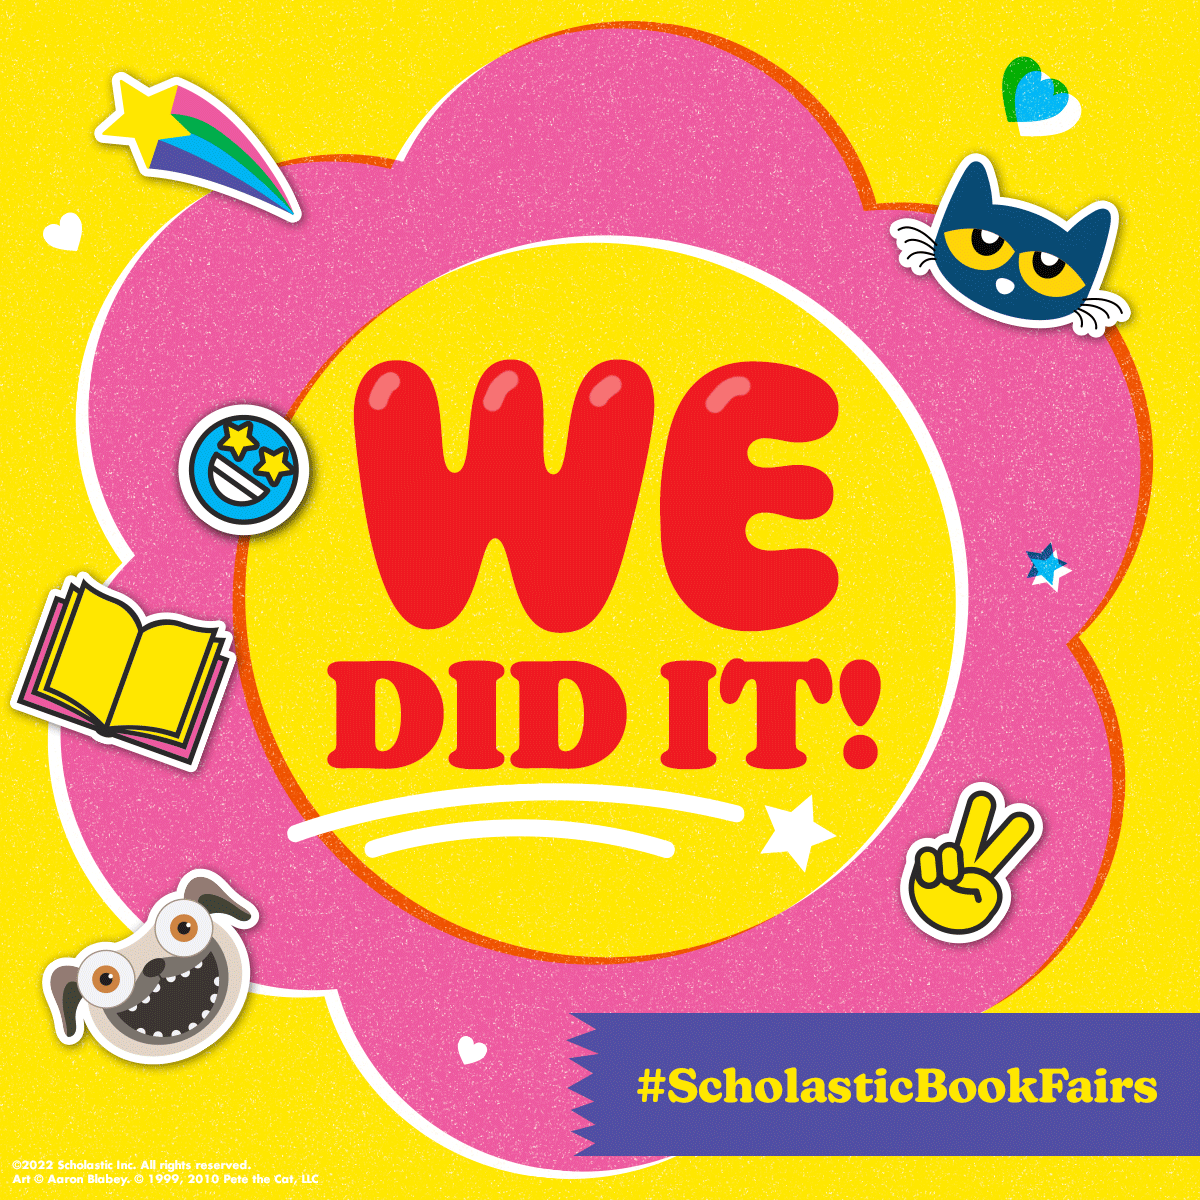 Houston we did it! Our first Book Fair in six years and we knocked it out of the park! Thank you to all of the folks in the Bullpen who helped make this such a success! @dcpublicschools @DcpsLibrary @CHHouston_ES @Ward7EdCouncil